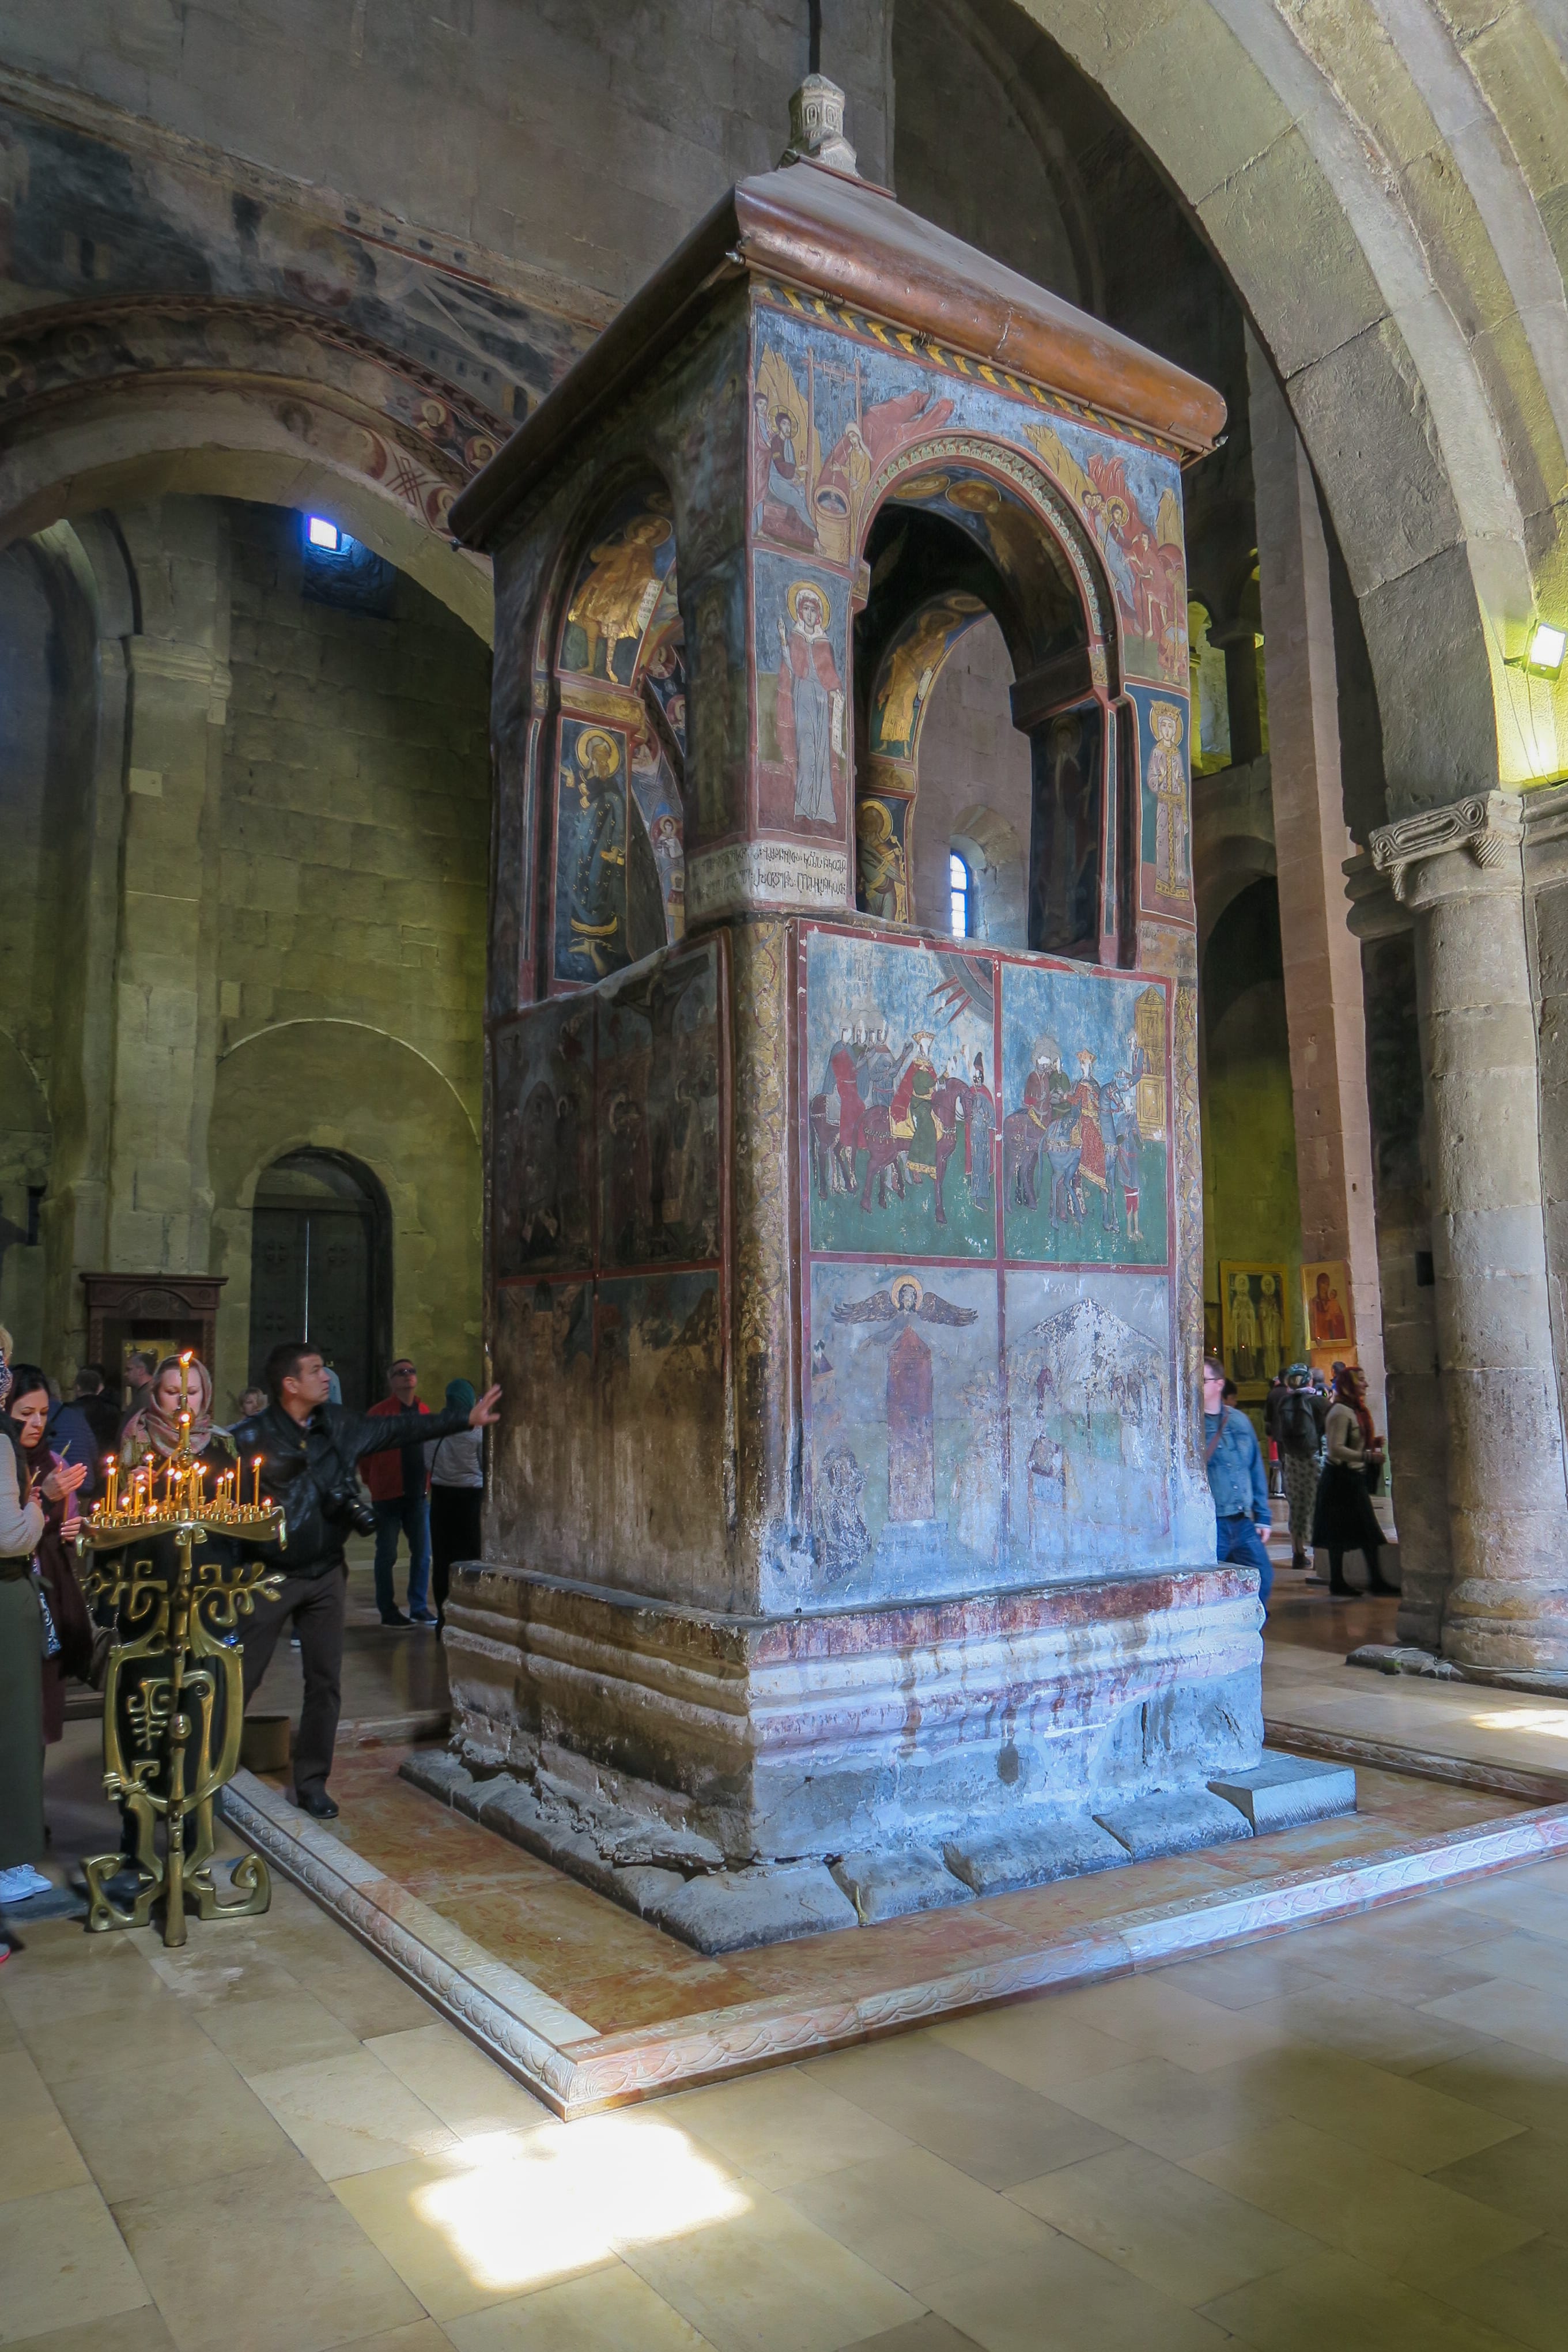 Monument under which the robe of Jesus is said to have been buried